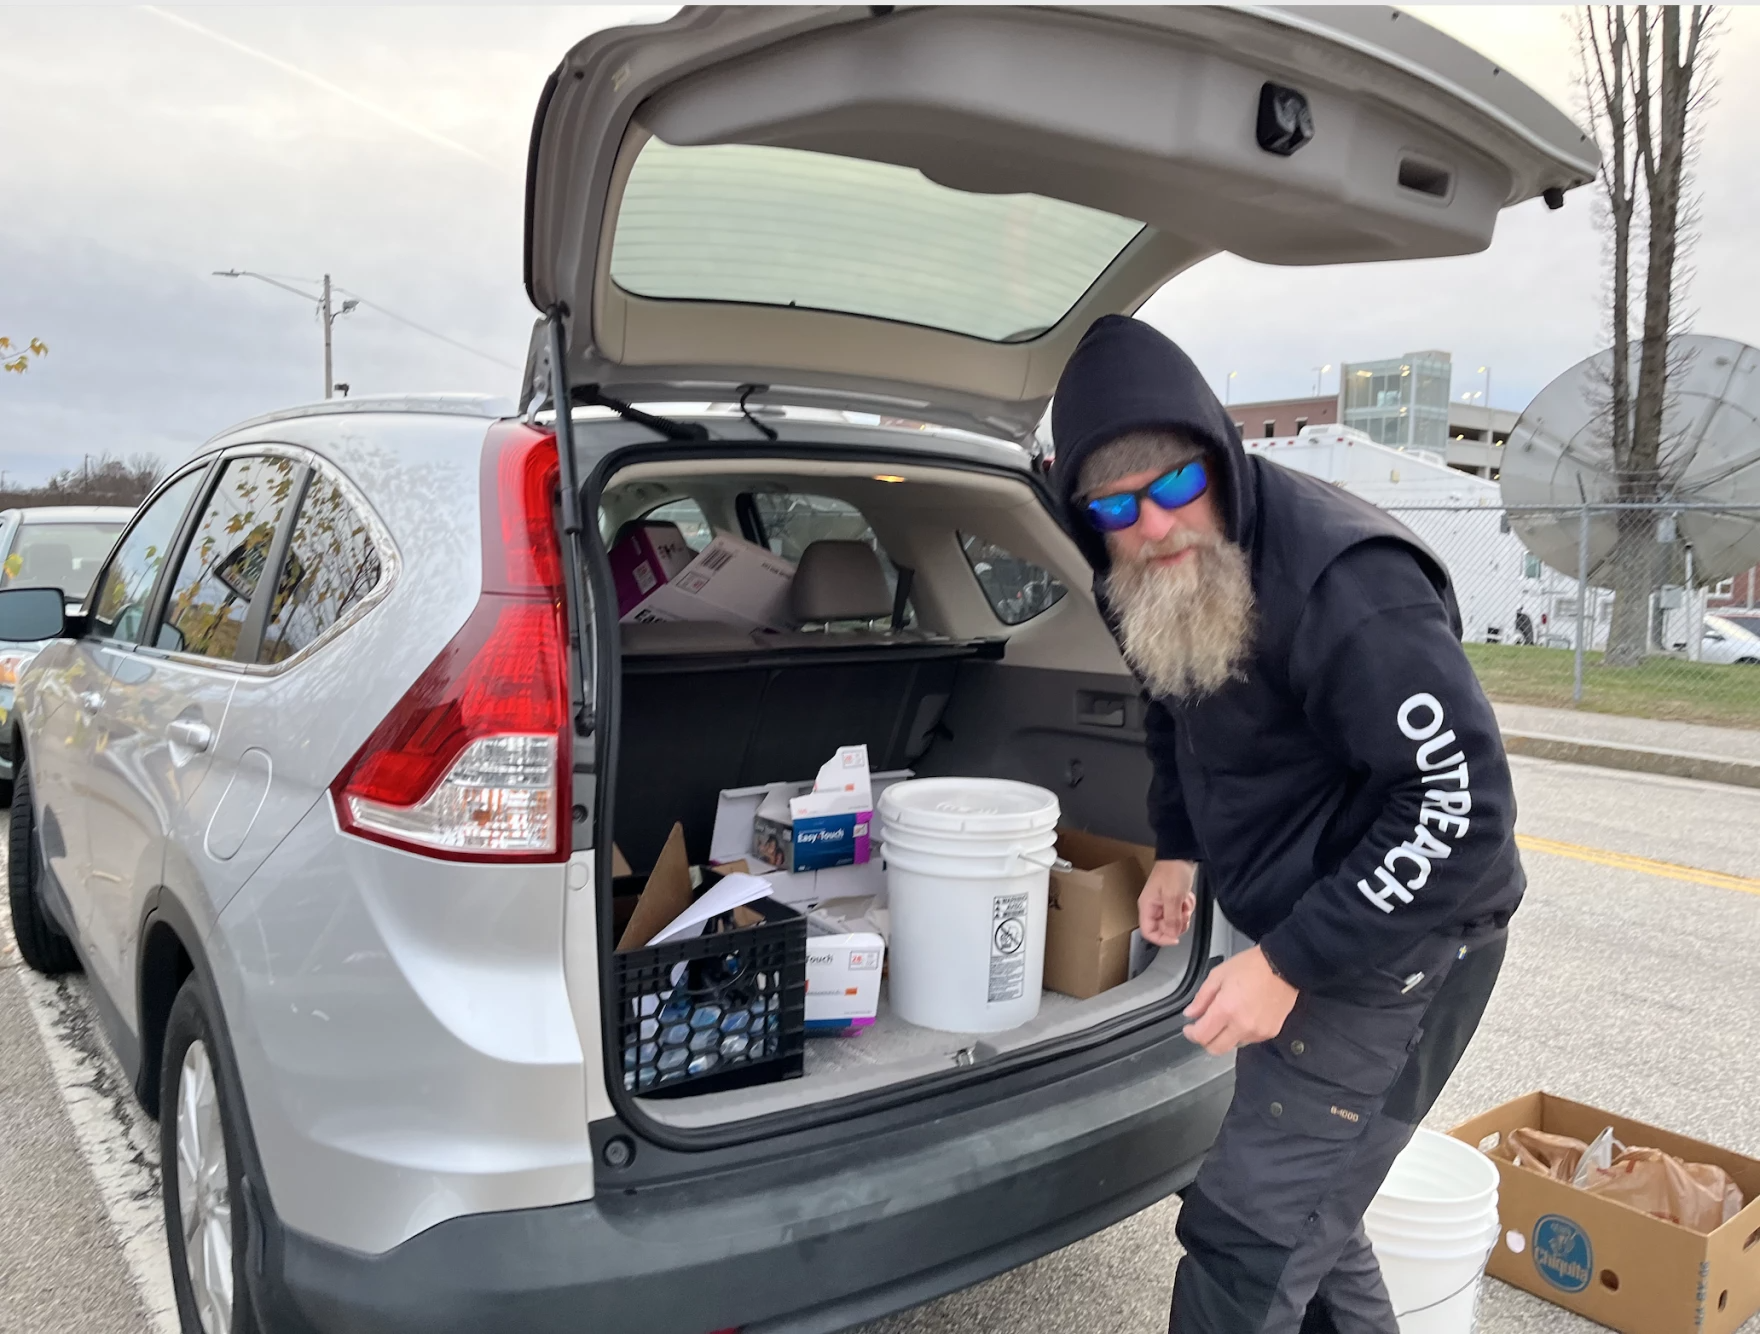 Andrew Warner handing out supplies as part of a syringe exchange program in Manchester in November. Warner, then an outreach worker for the treatment provider Better Life Partners, is now the city's director of overdose prevention.